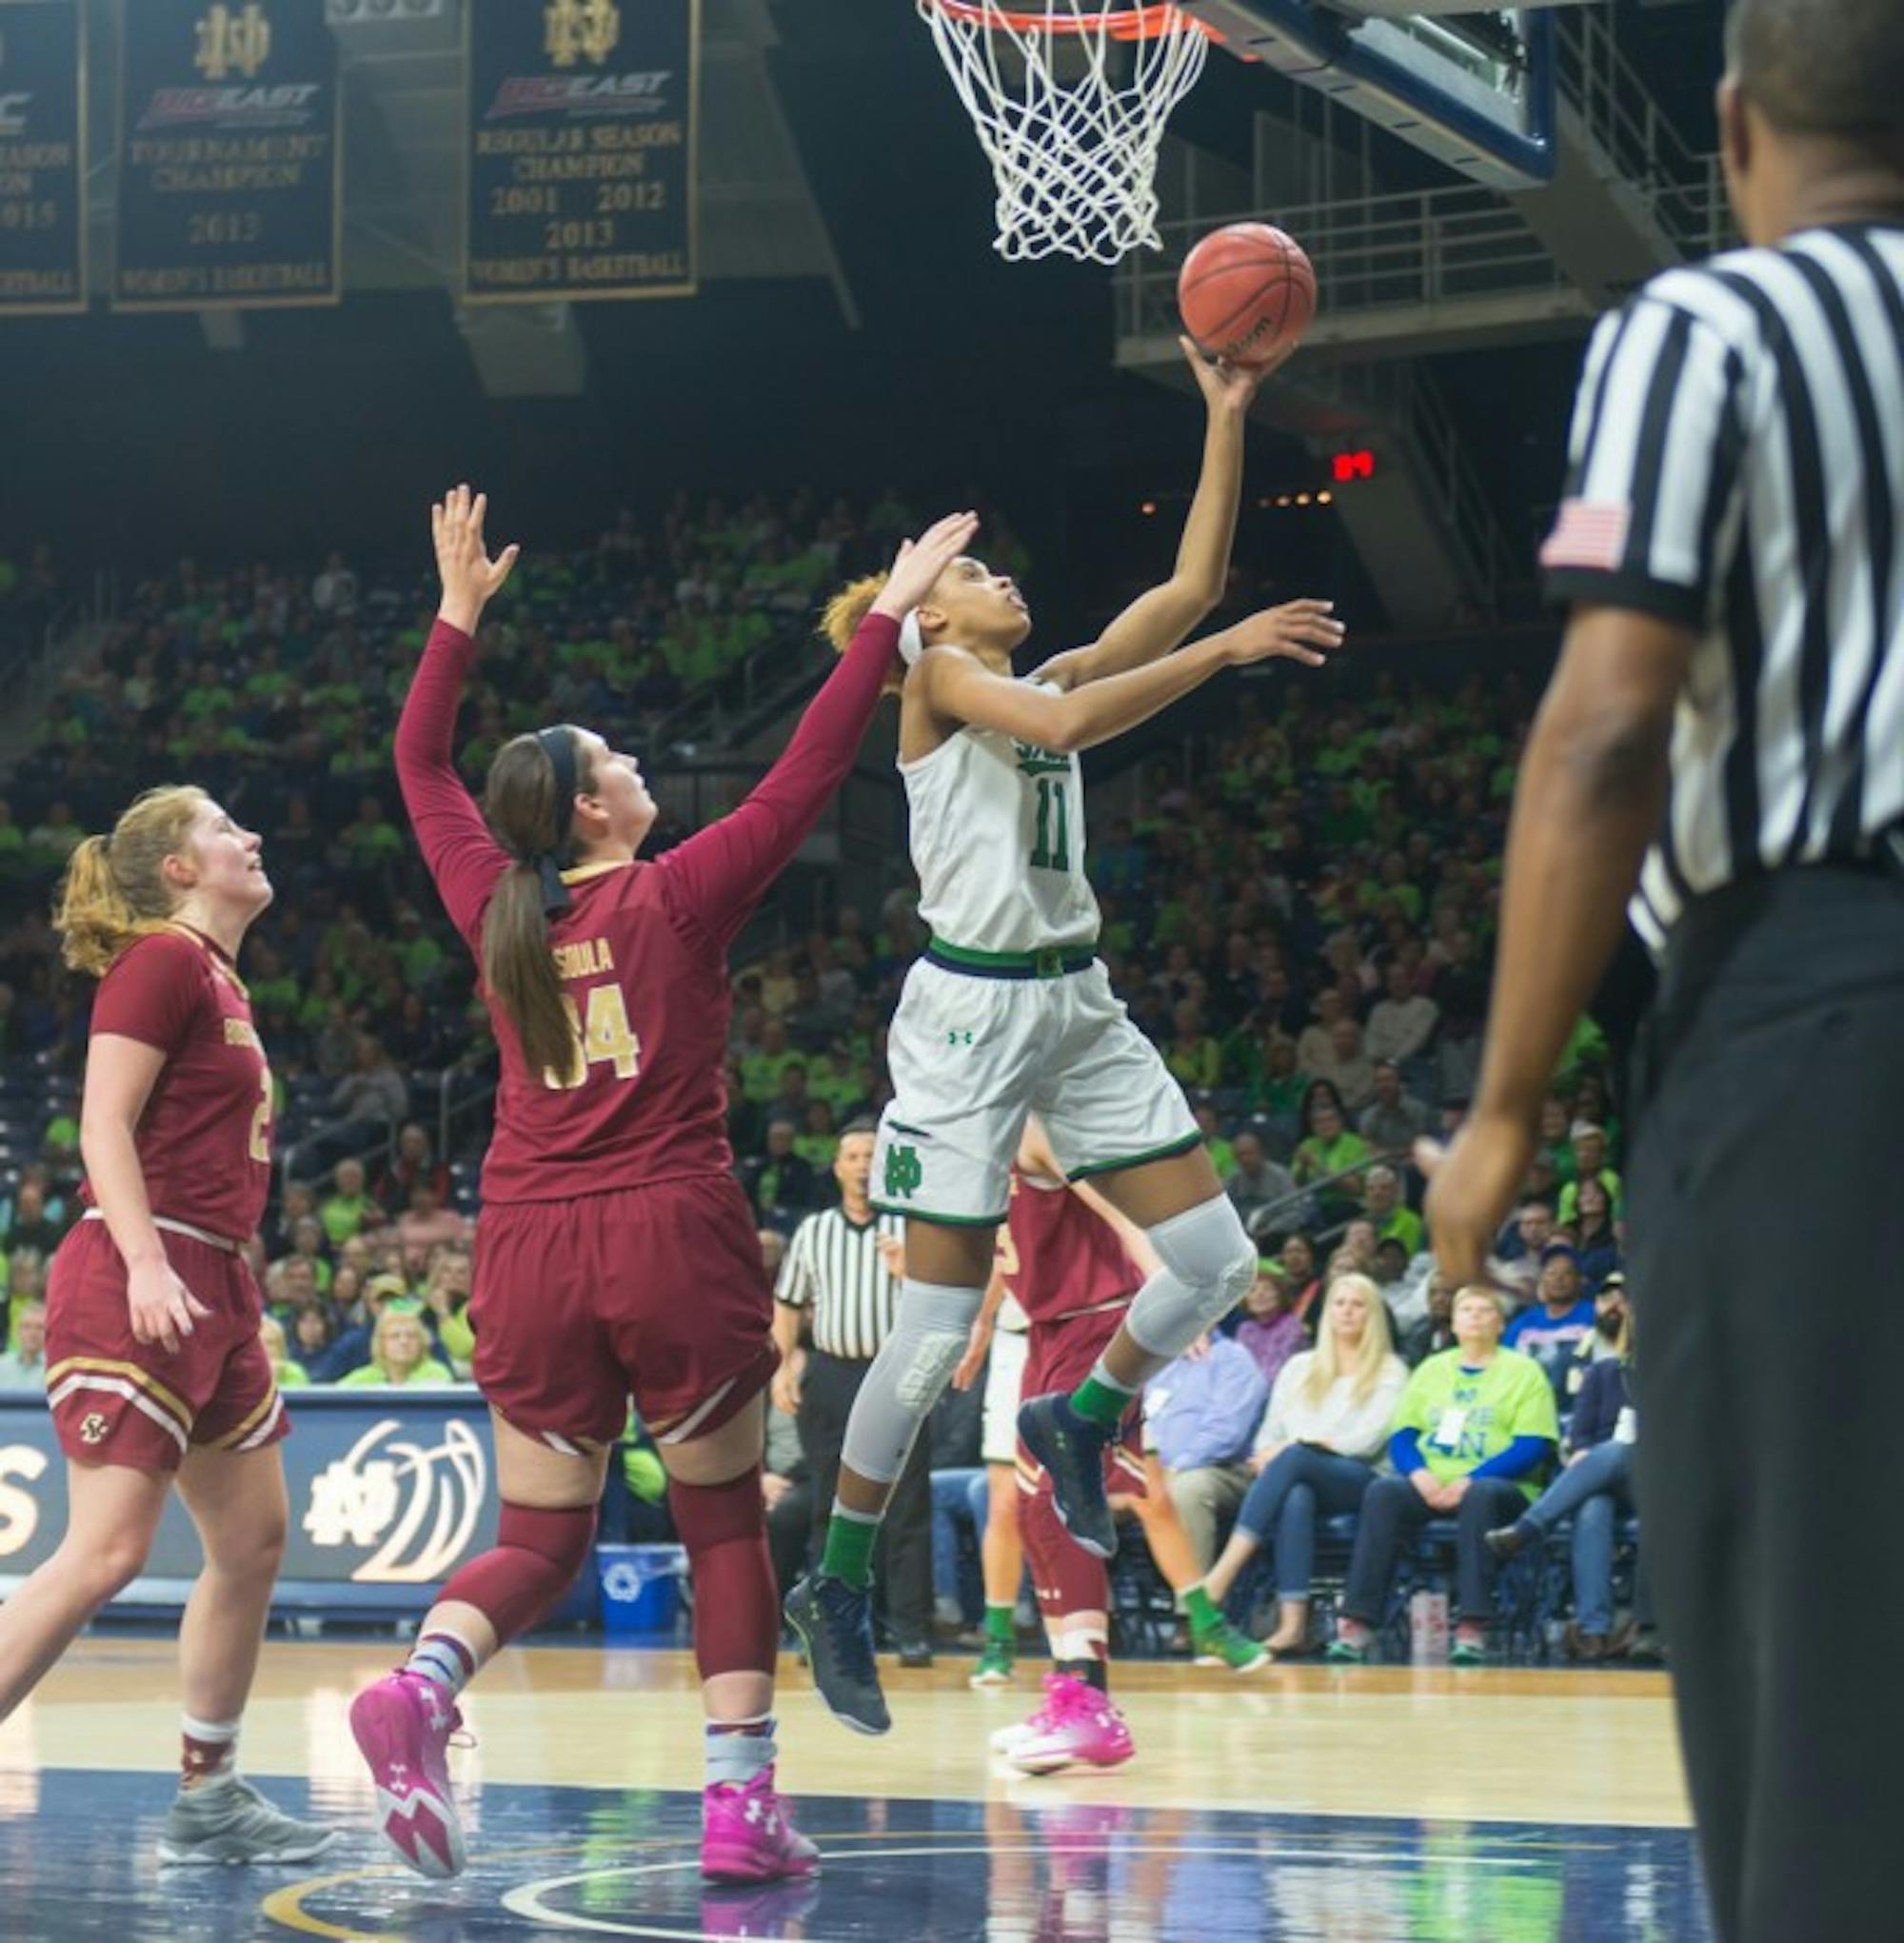 Irish junior forward Brianna Turner goes up for a layup during Notre Dame’s 80-69 win over Boston College on Jan. 19 at Purcell Pavilion.